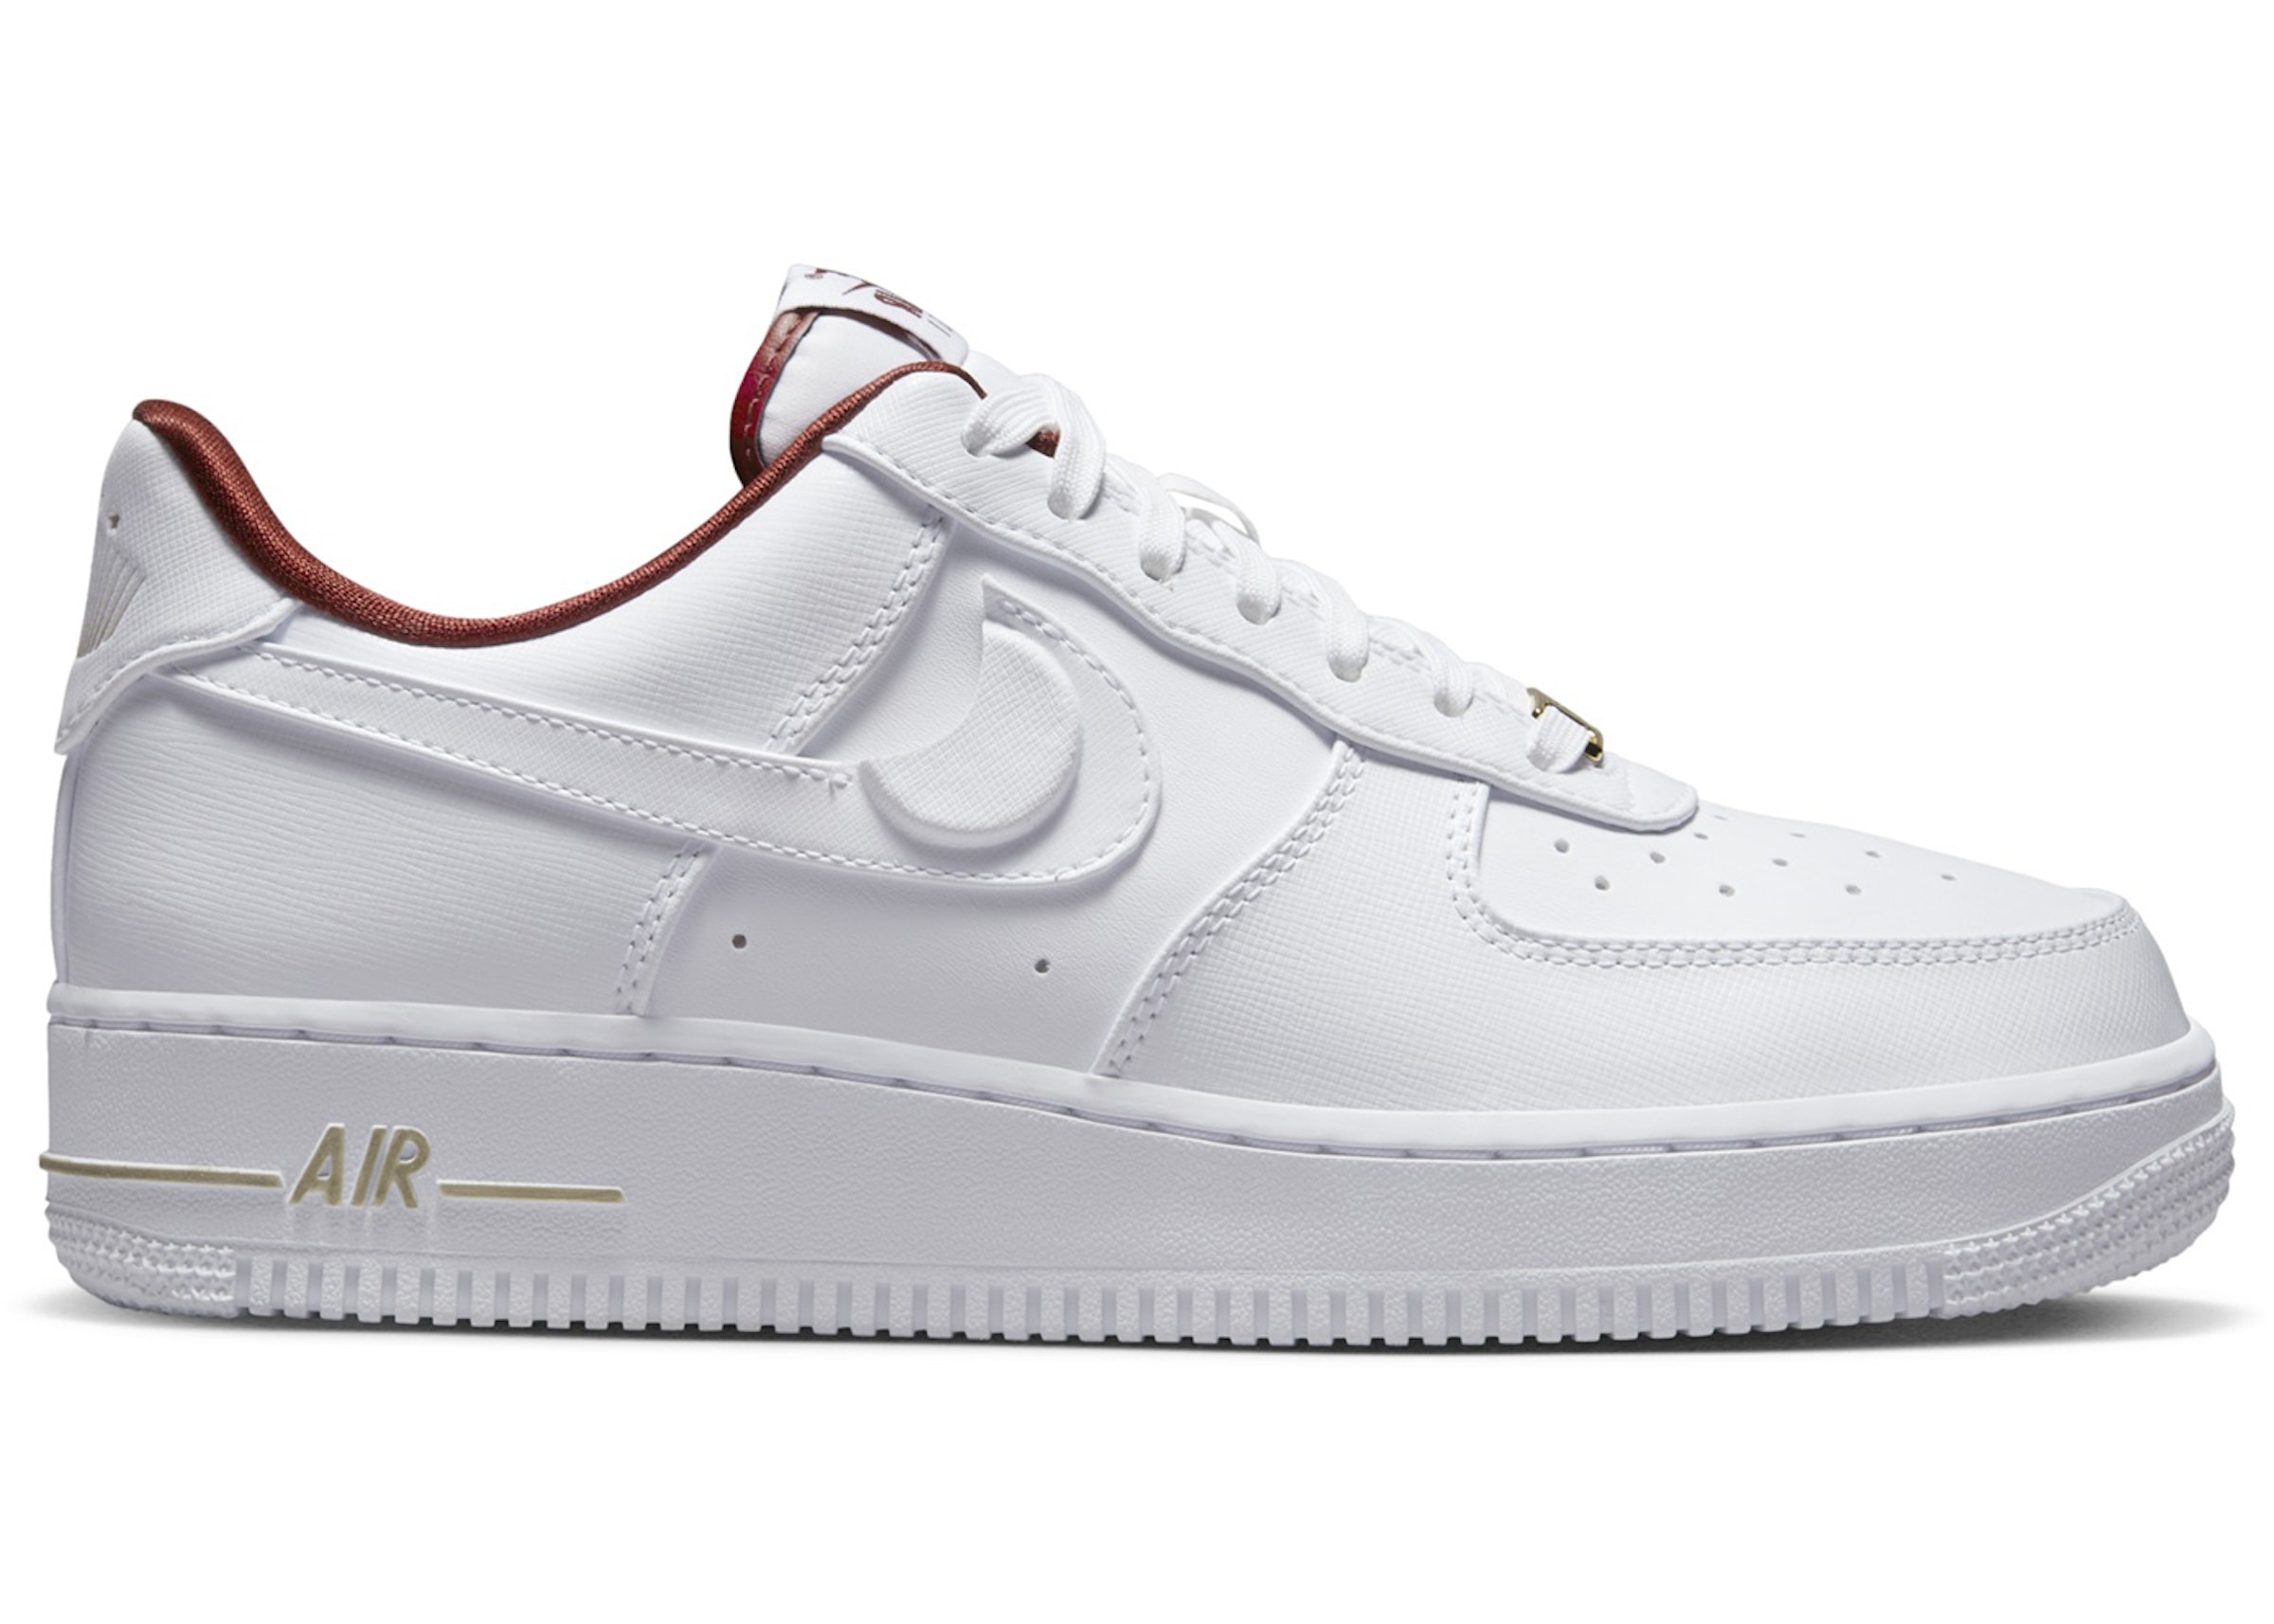 Nike Air Force 1 Low '07 Just Do It Summit White Team Red (Women's) - DV7584-100 - US